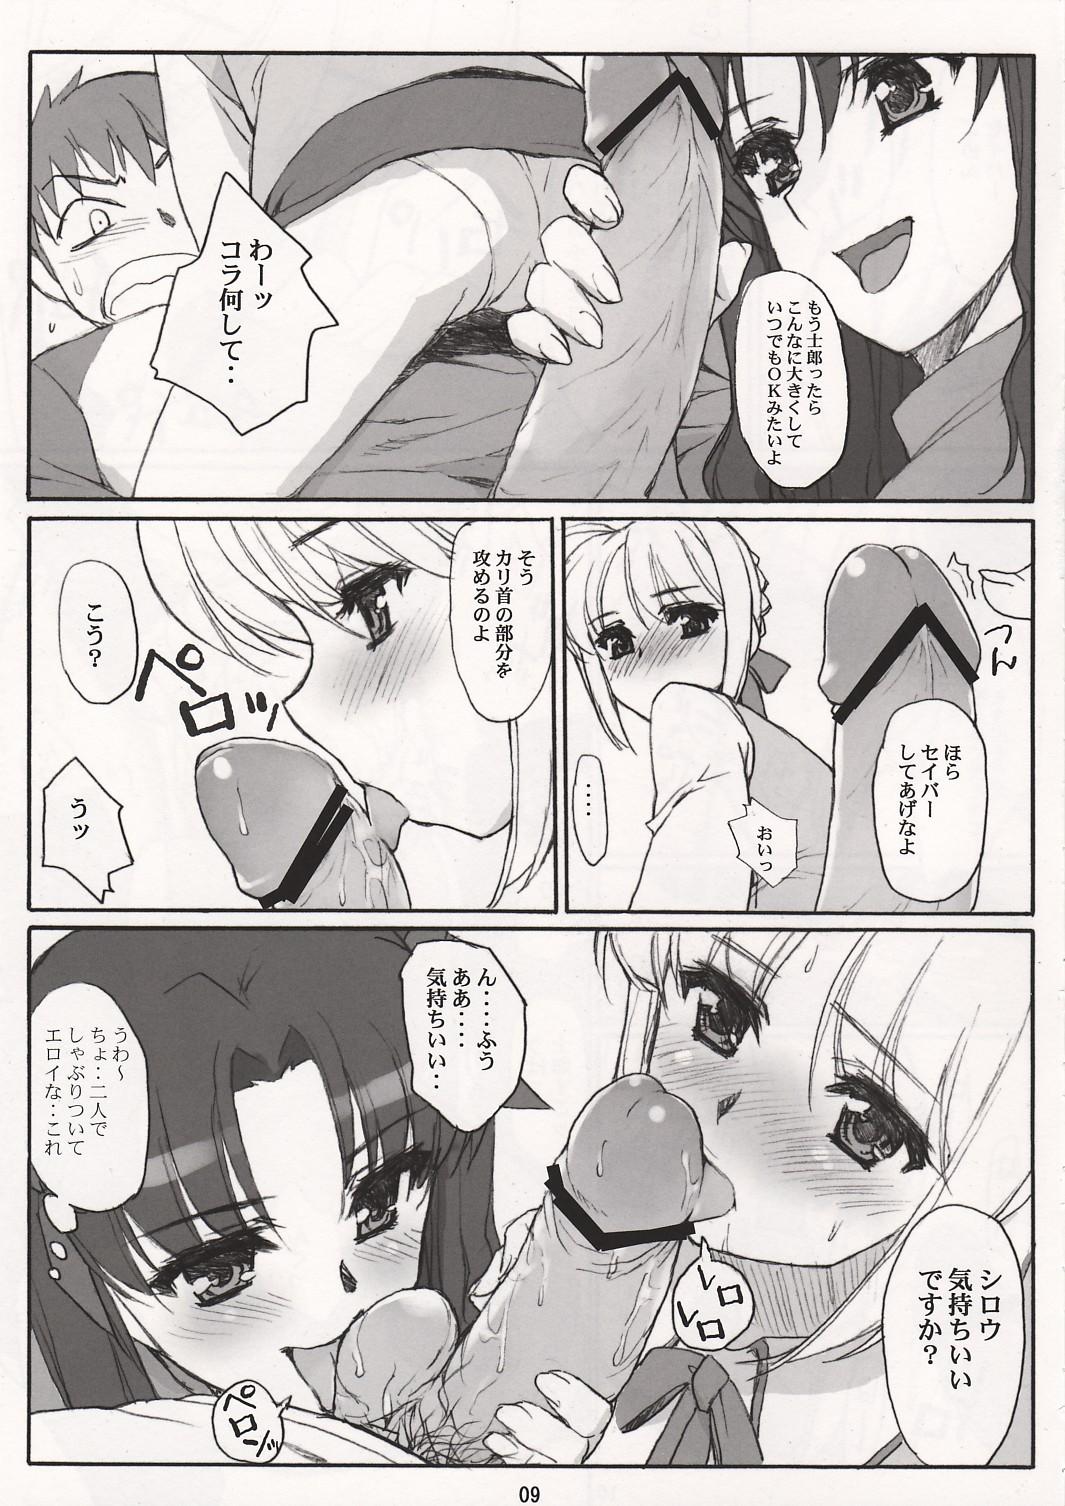 Cuckolding SAVER TEETH - Fate stay night Mommy - Page 9